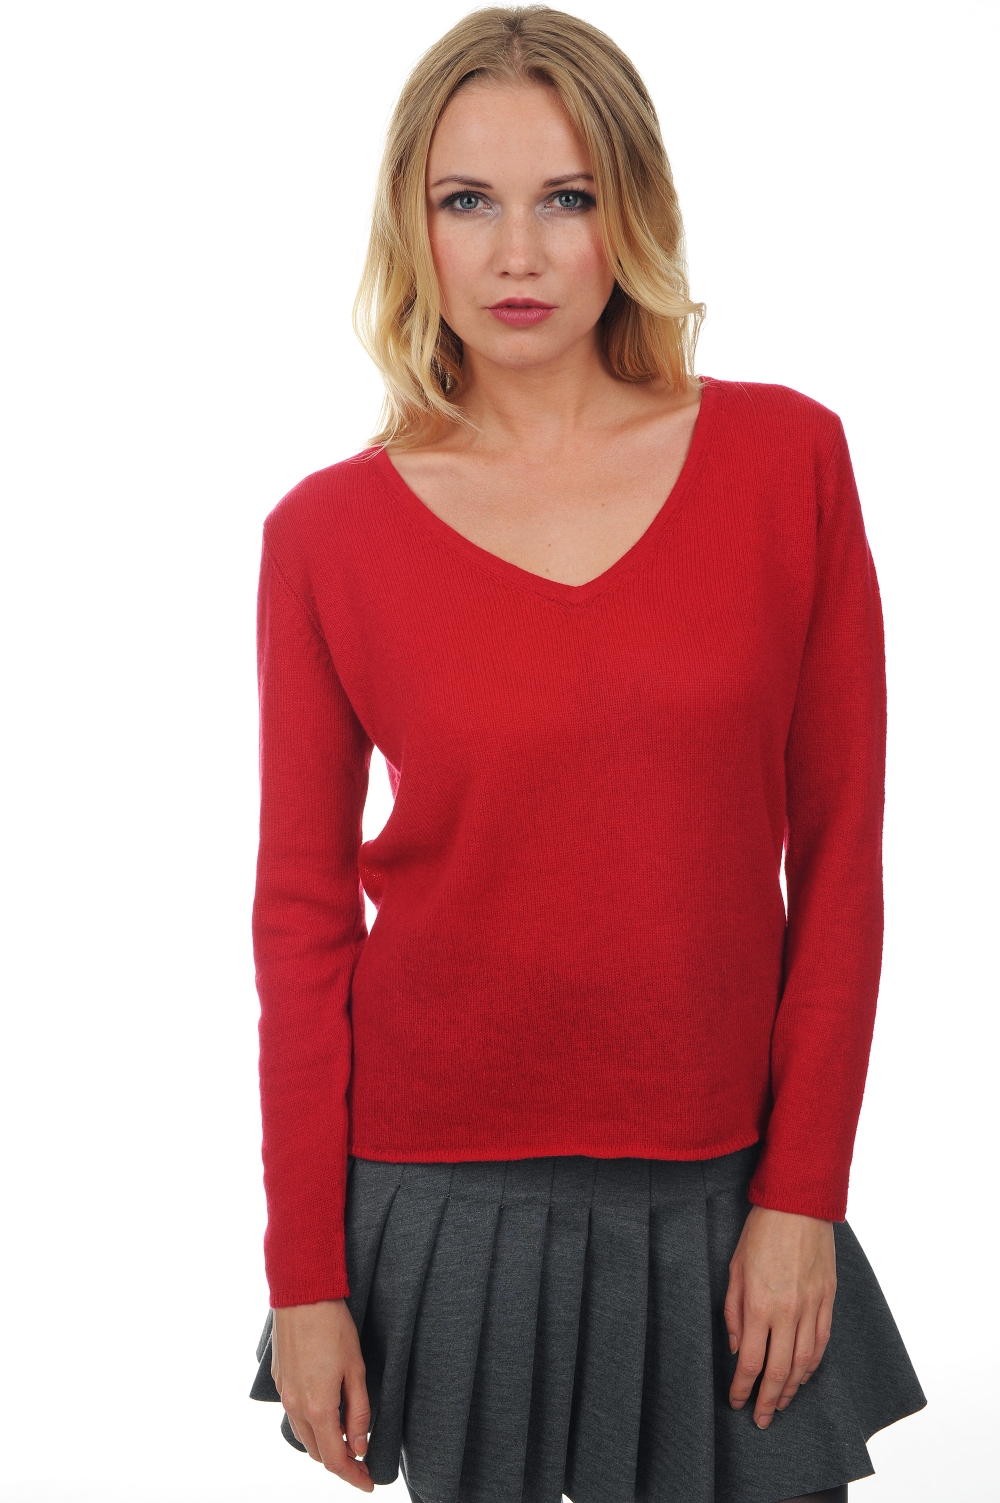 Cashmere ladies basic sweaters at low prices flavie blood red 3xl